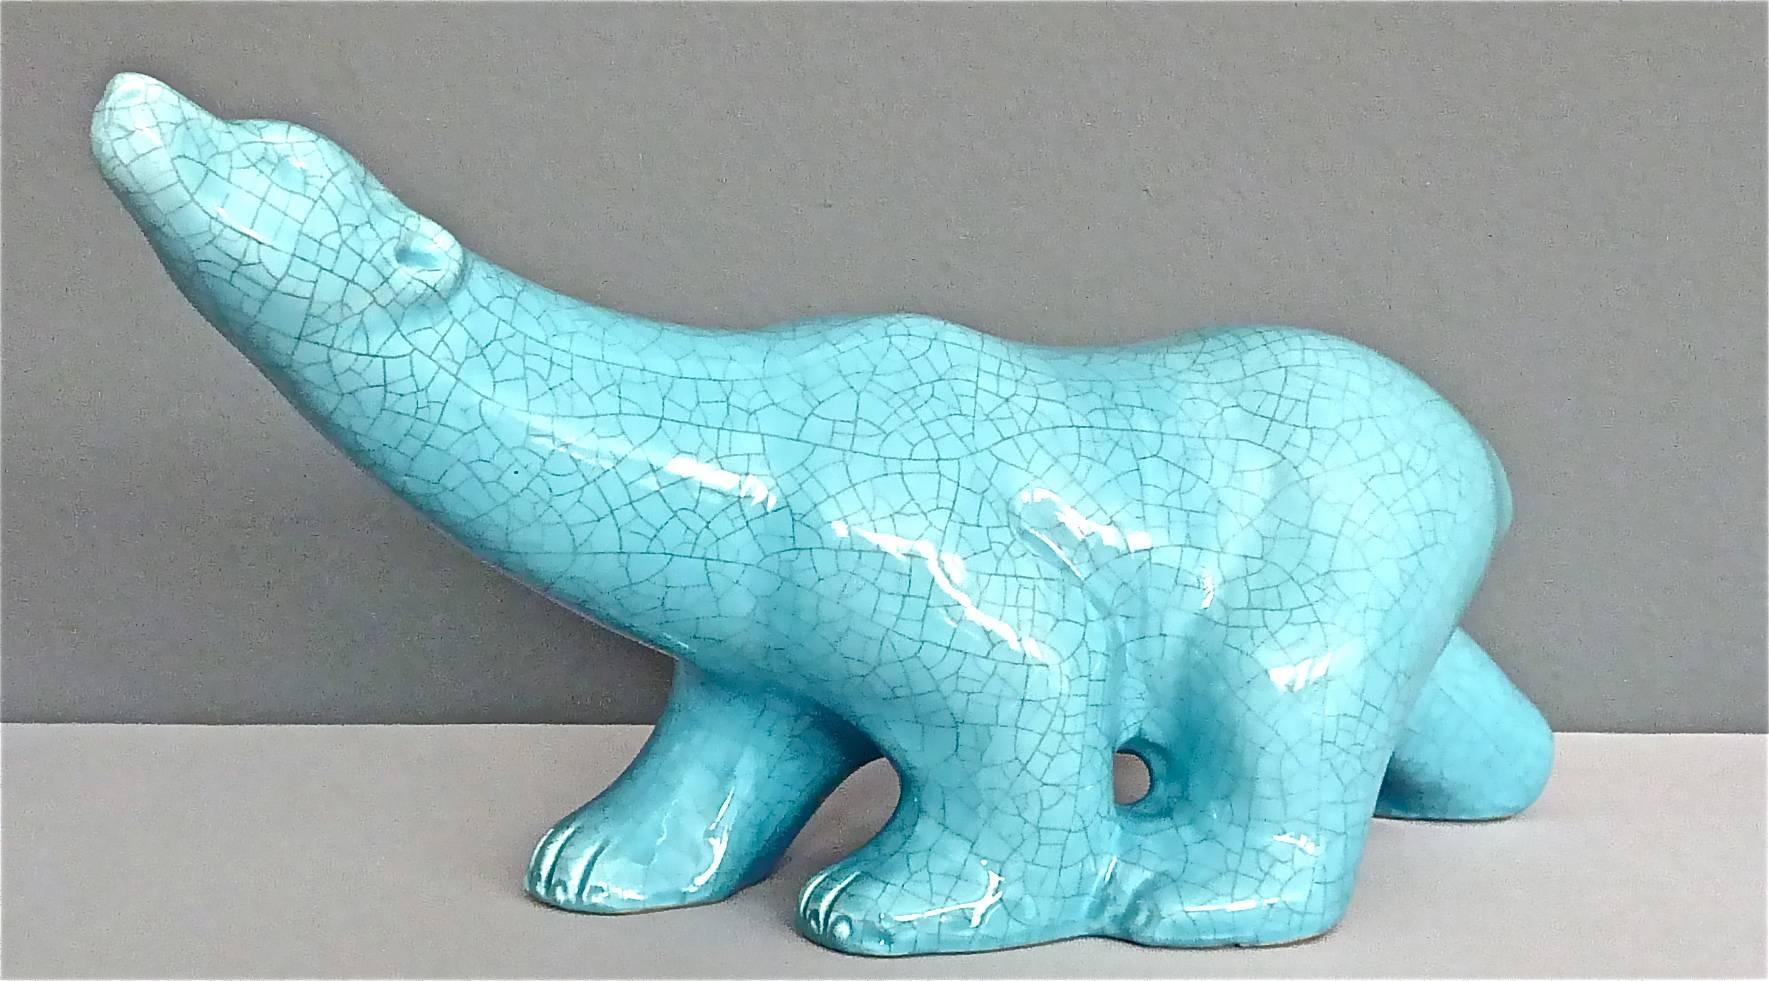 A large French light blue Art Deco crackle ceramic glaze sculpture of a striking polar bear inspired by the French artist and animal sculptor Franc¸ois Pompon. Marked LV Ceram at the bottom, the beautiful sculpture which can be dated around 1925-30